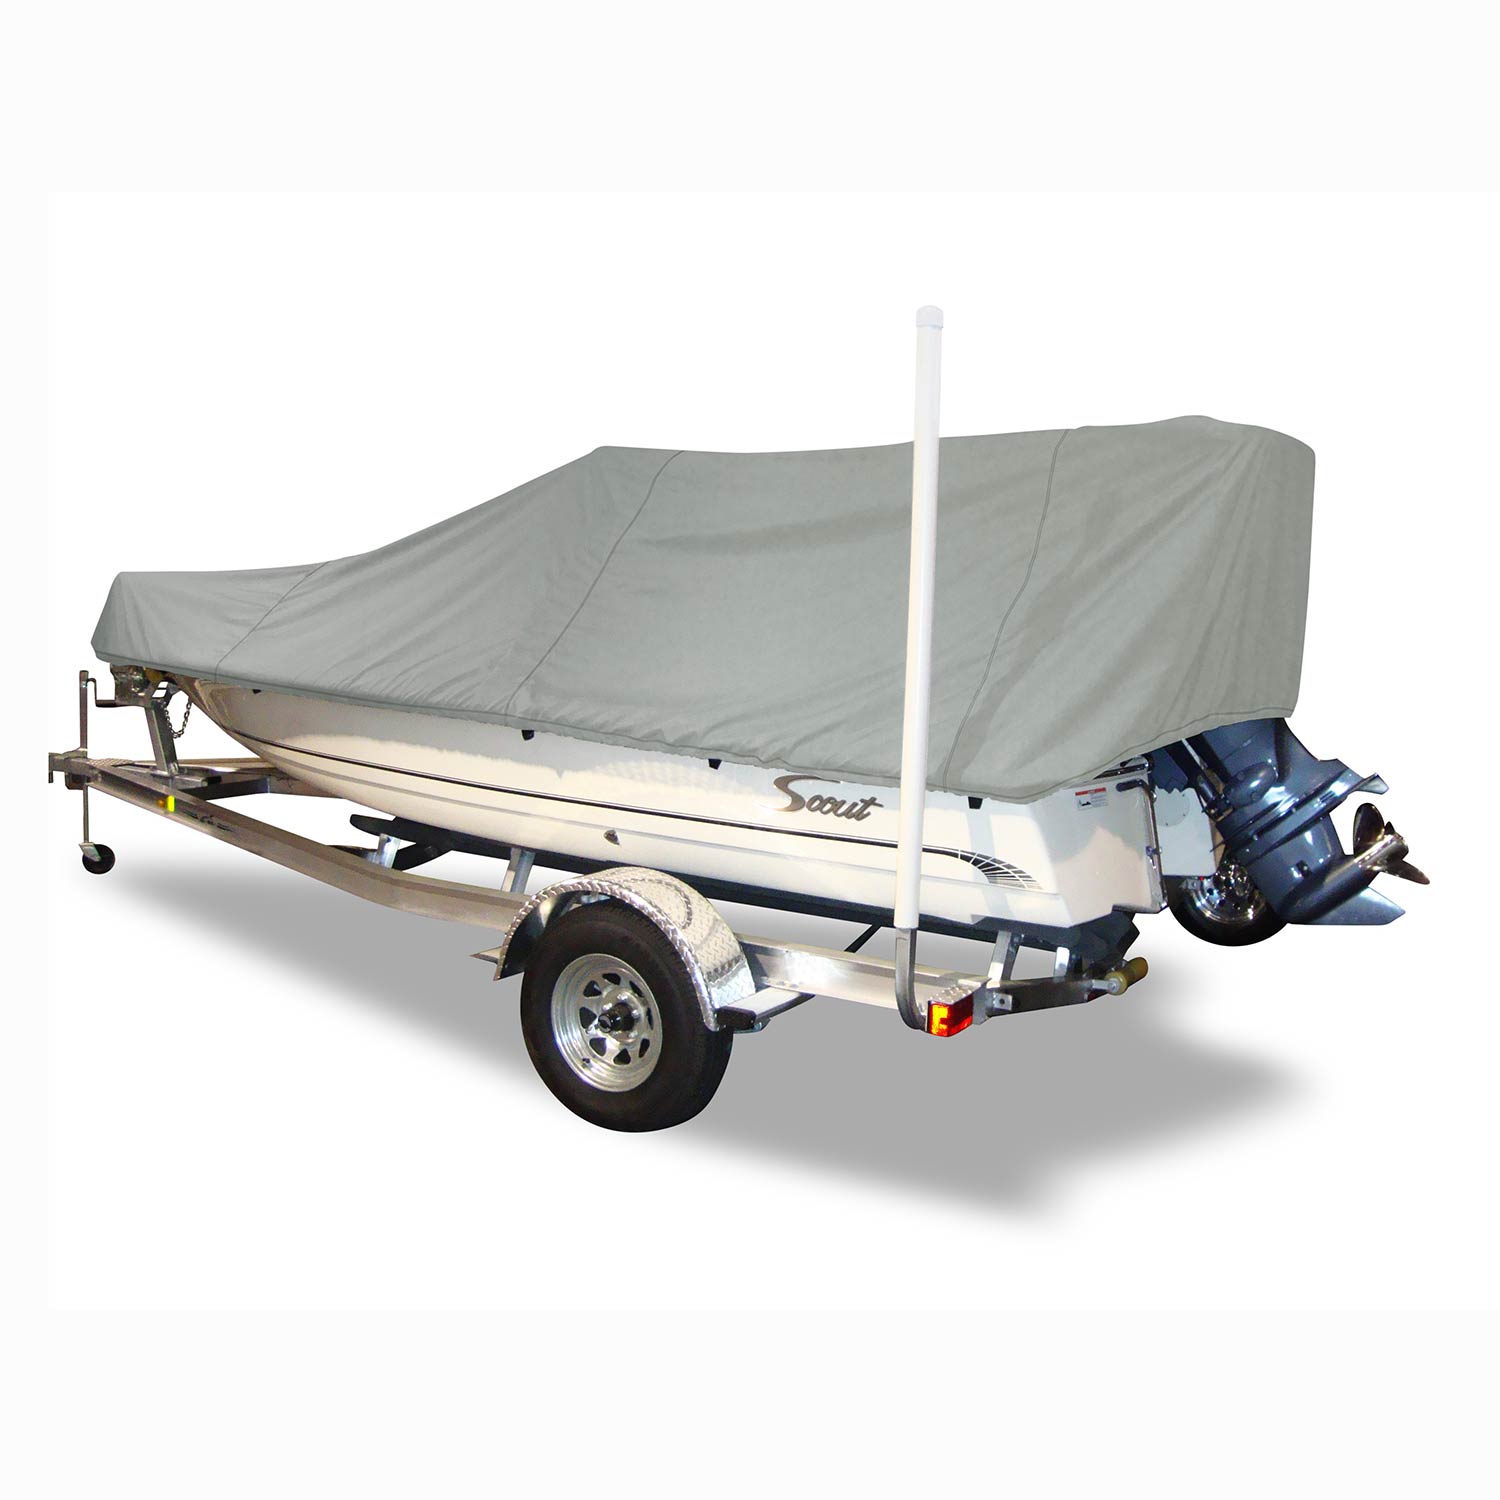 CARVER 18'6 Styled-to-Fit Boat Cover for Narrow V-Hull Center